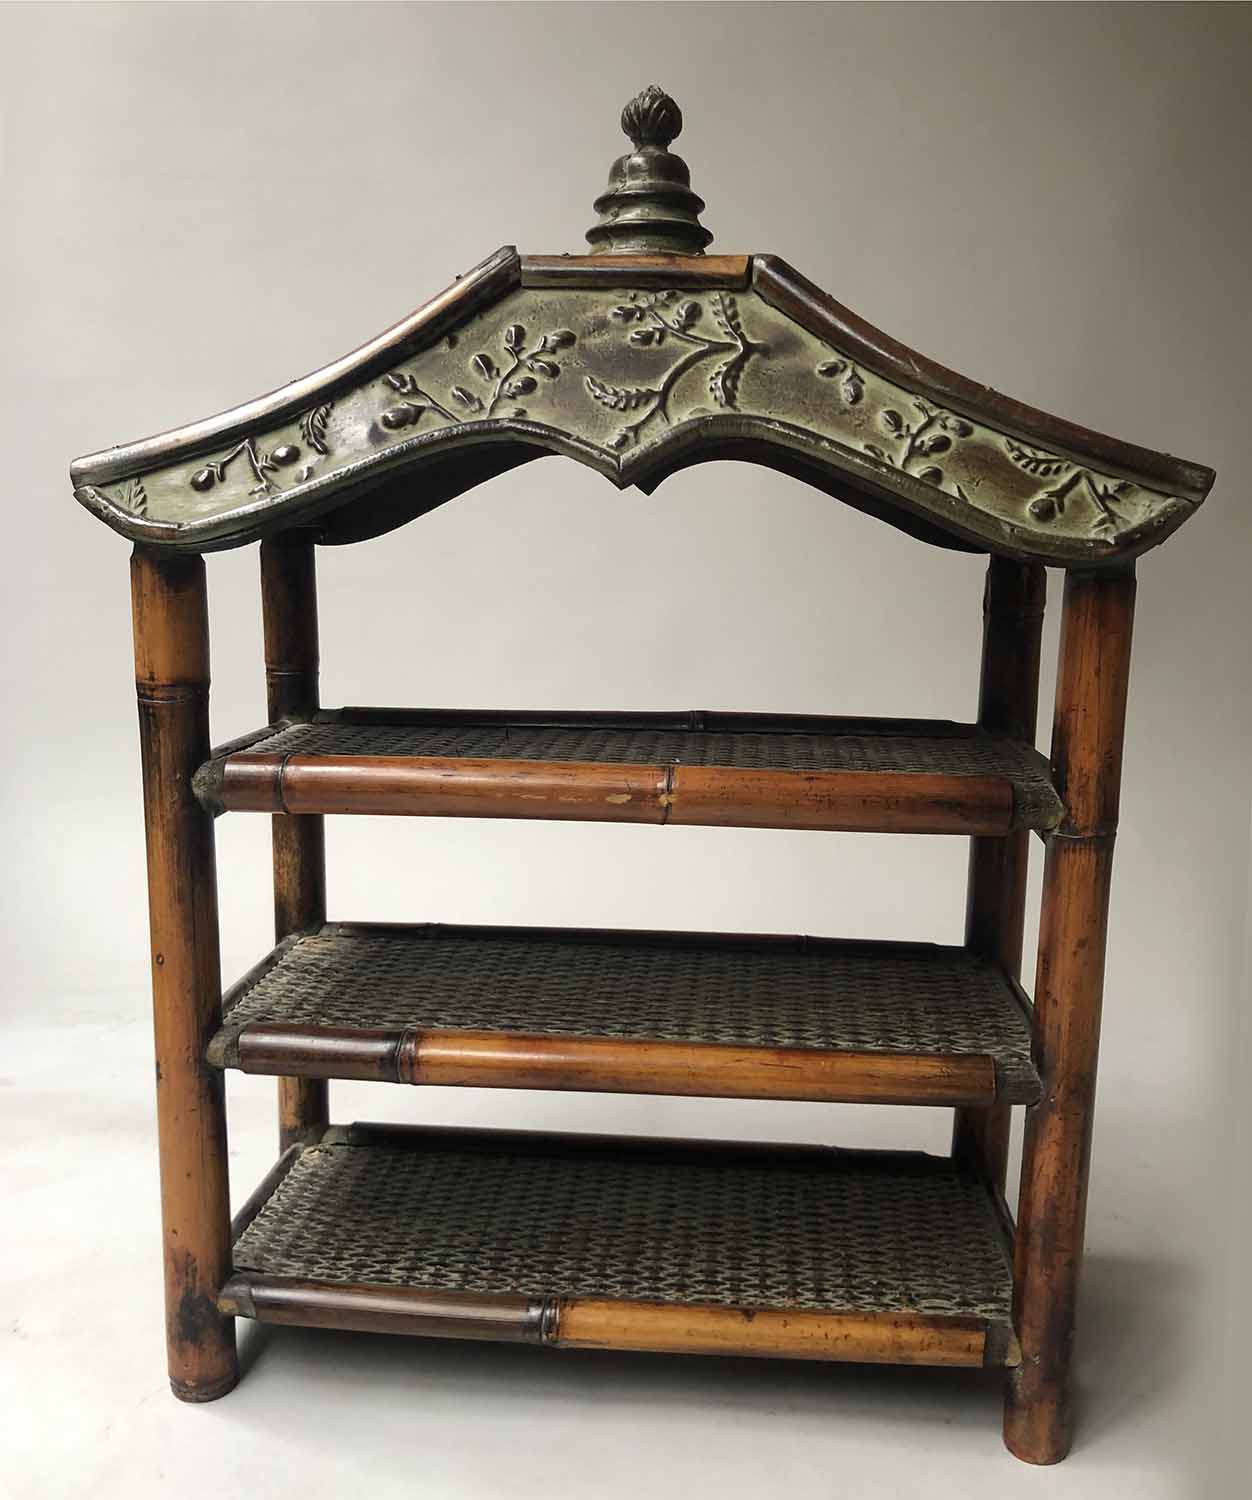 HANGING SHELVES, a pair, bamboo and cane shelved each with verdigris pagoda tops, 59cm H x 44cm W. - Image 2 of 3